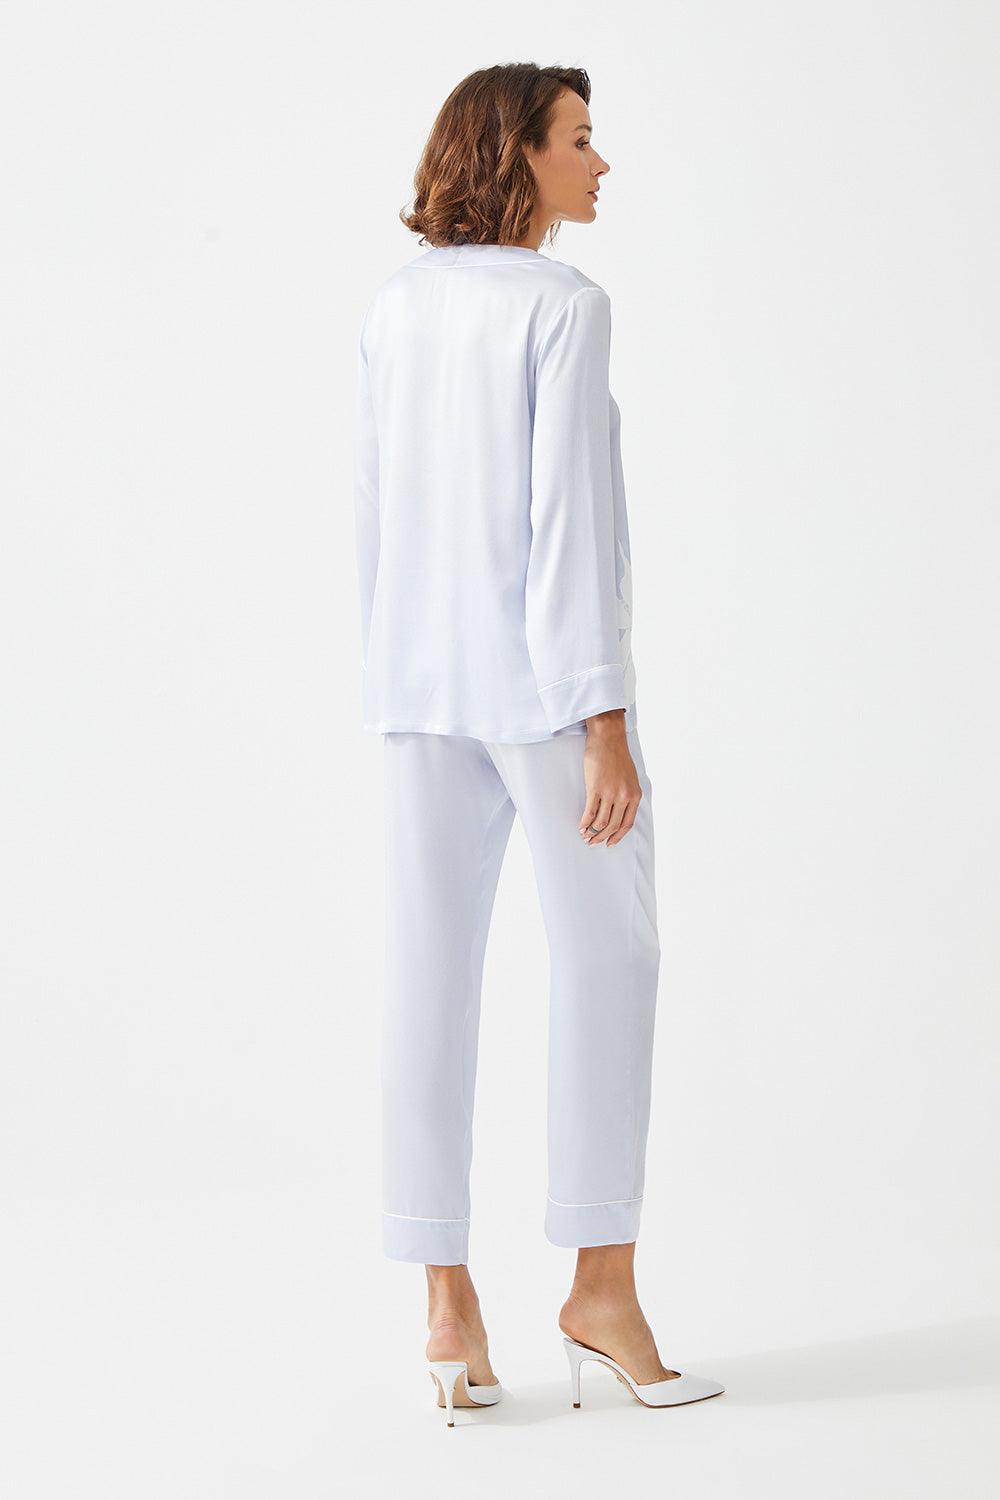 Alnus Trimmed Rayon and Buttoned Long Sleeve Pyjama Set - Ice Blue - Bocan